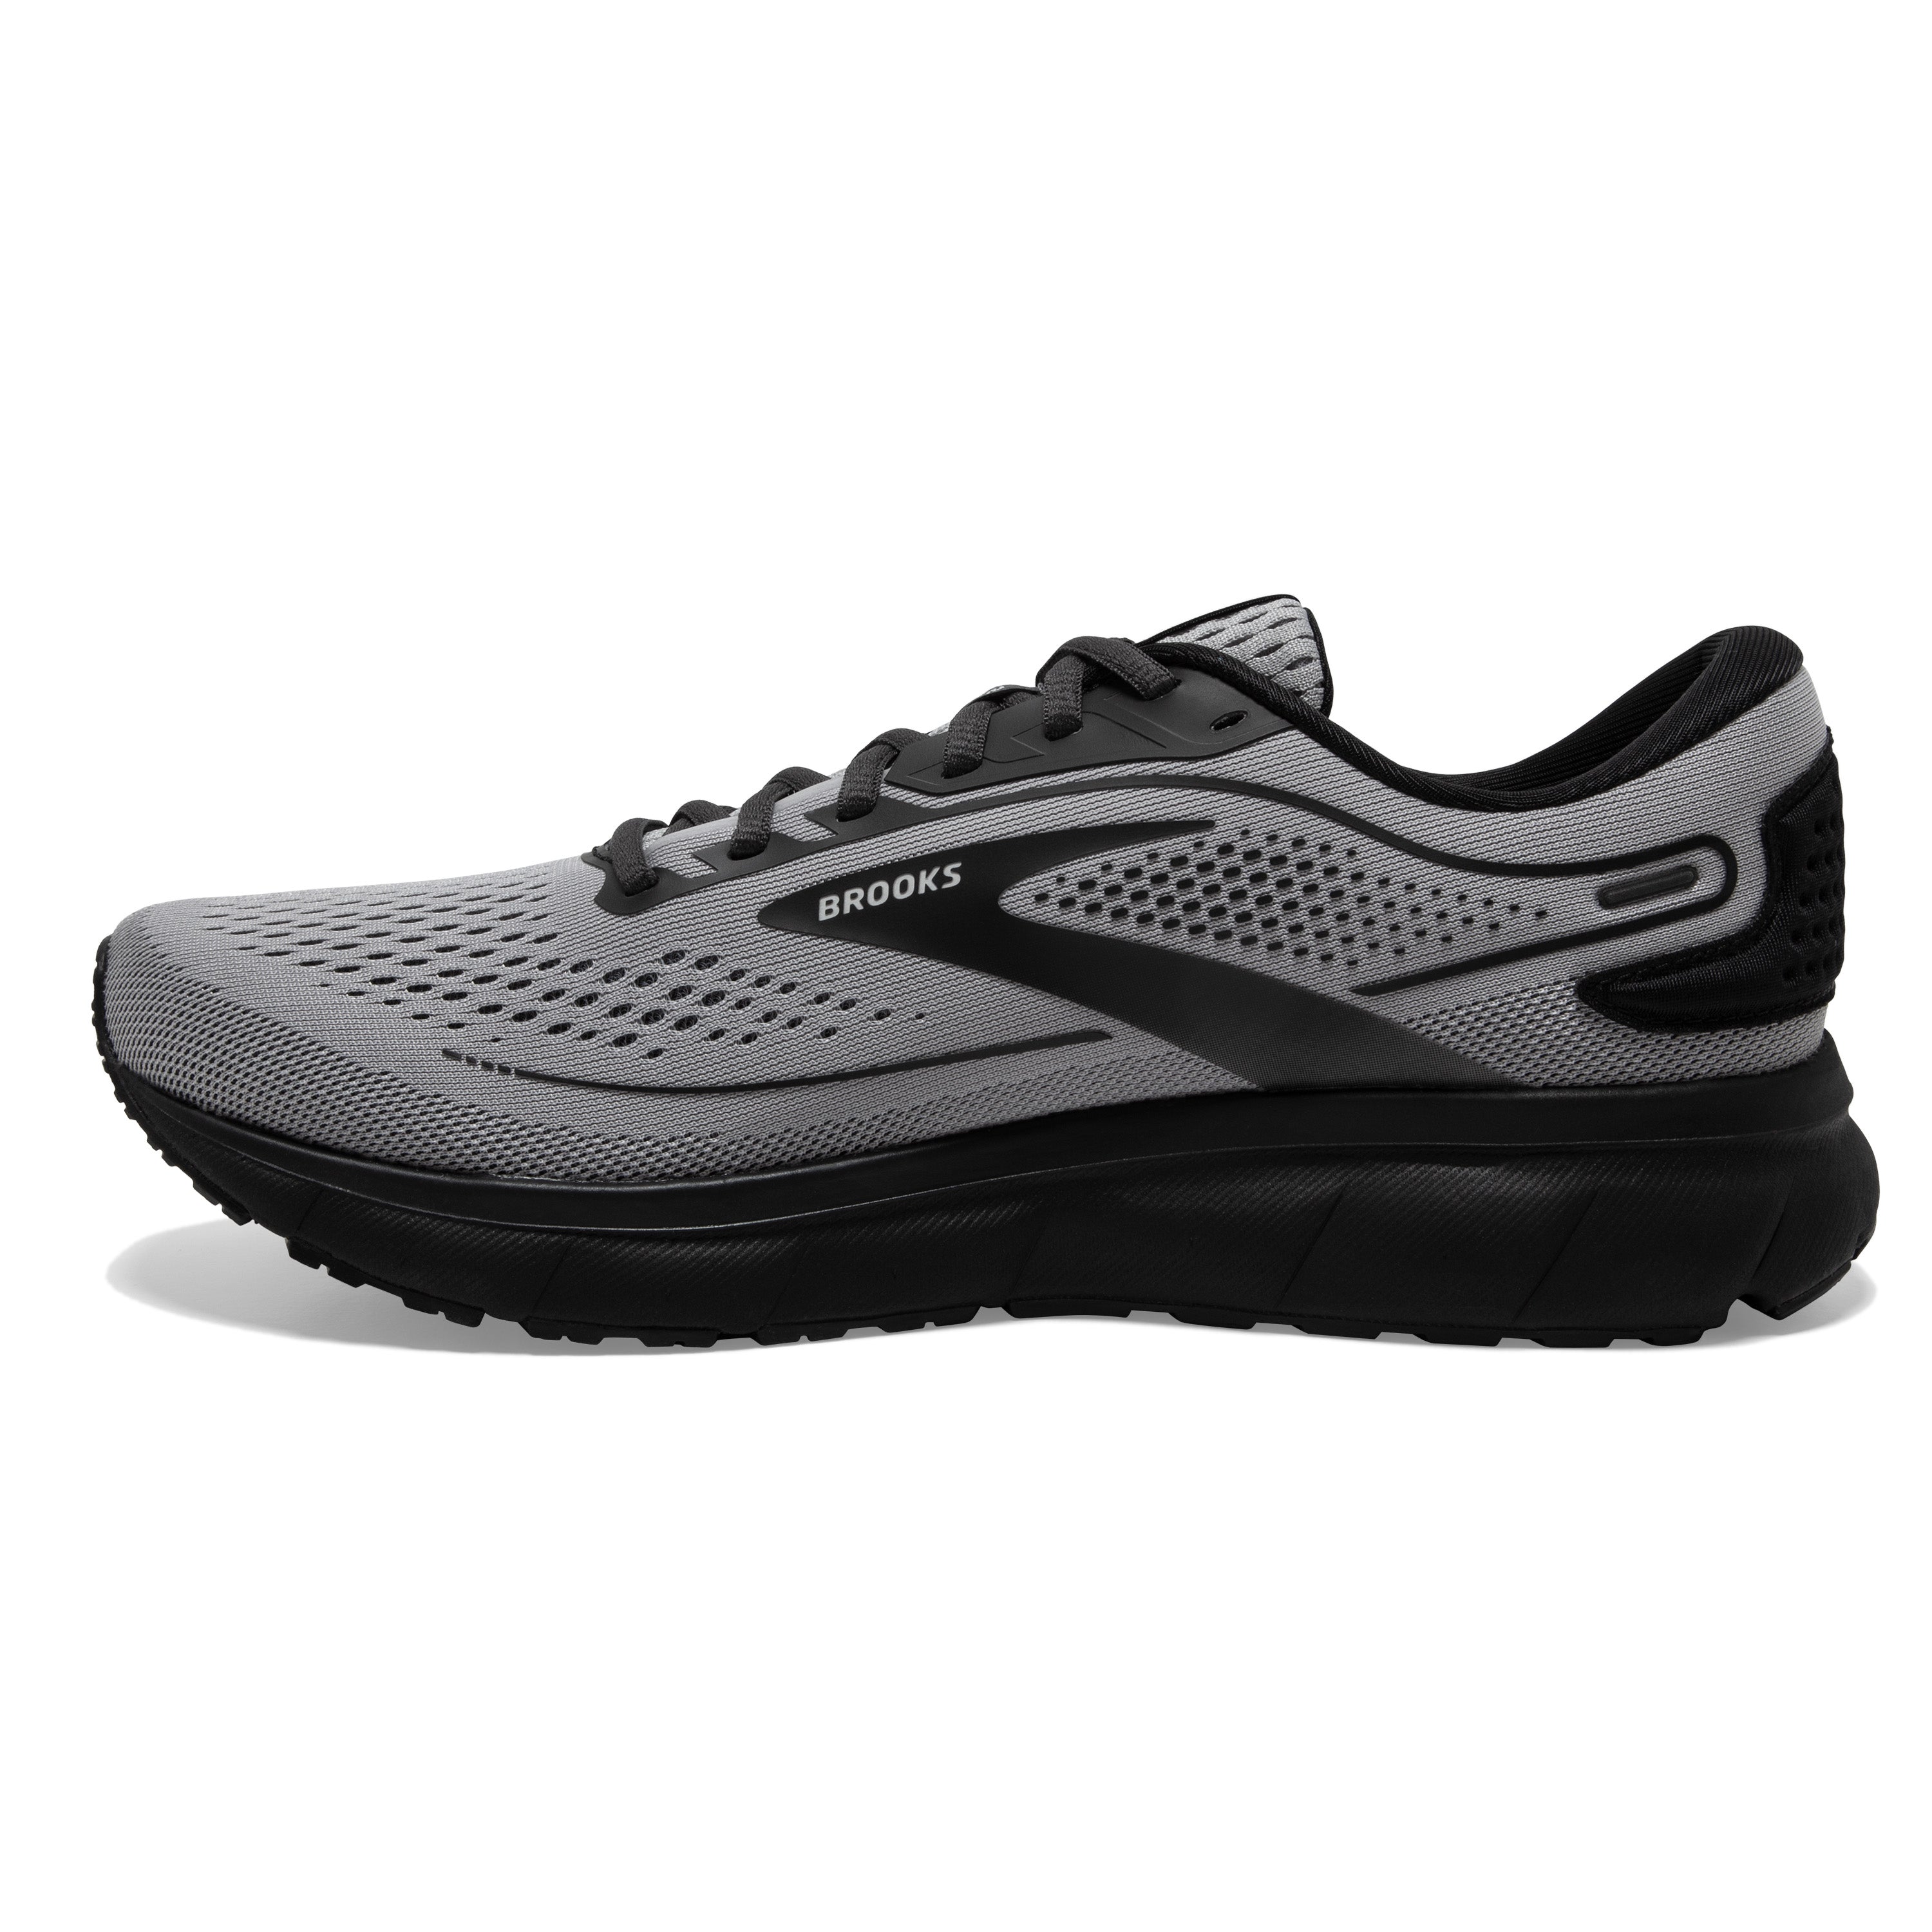 Trace 2 Men's Running Shoes